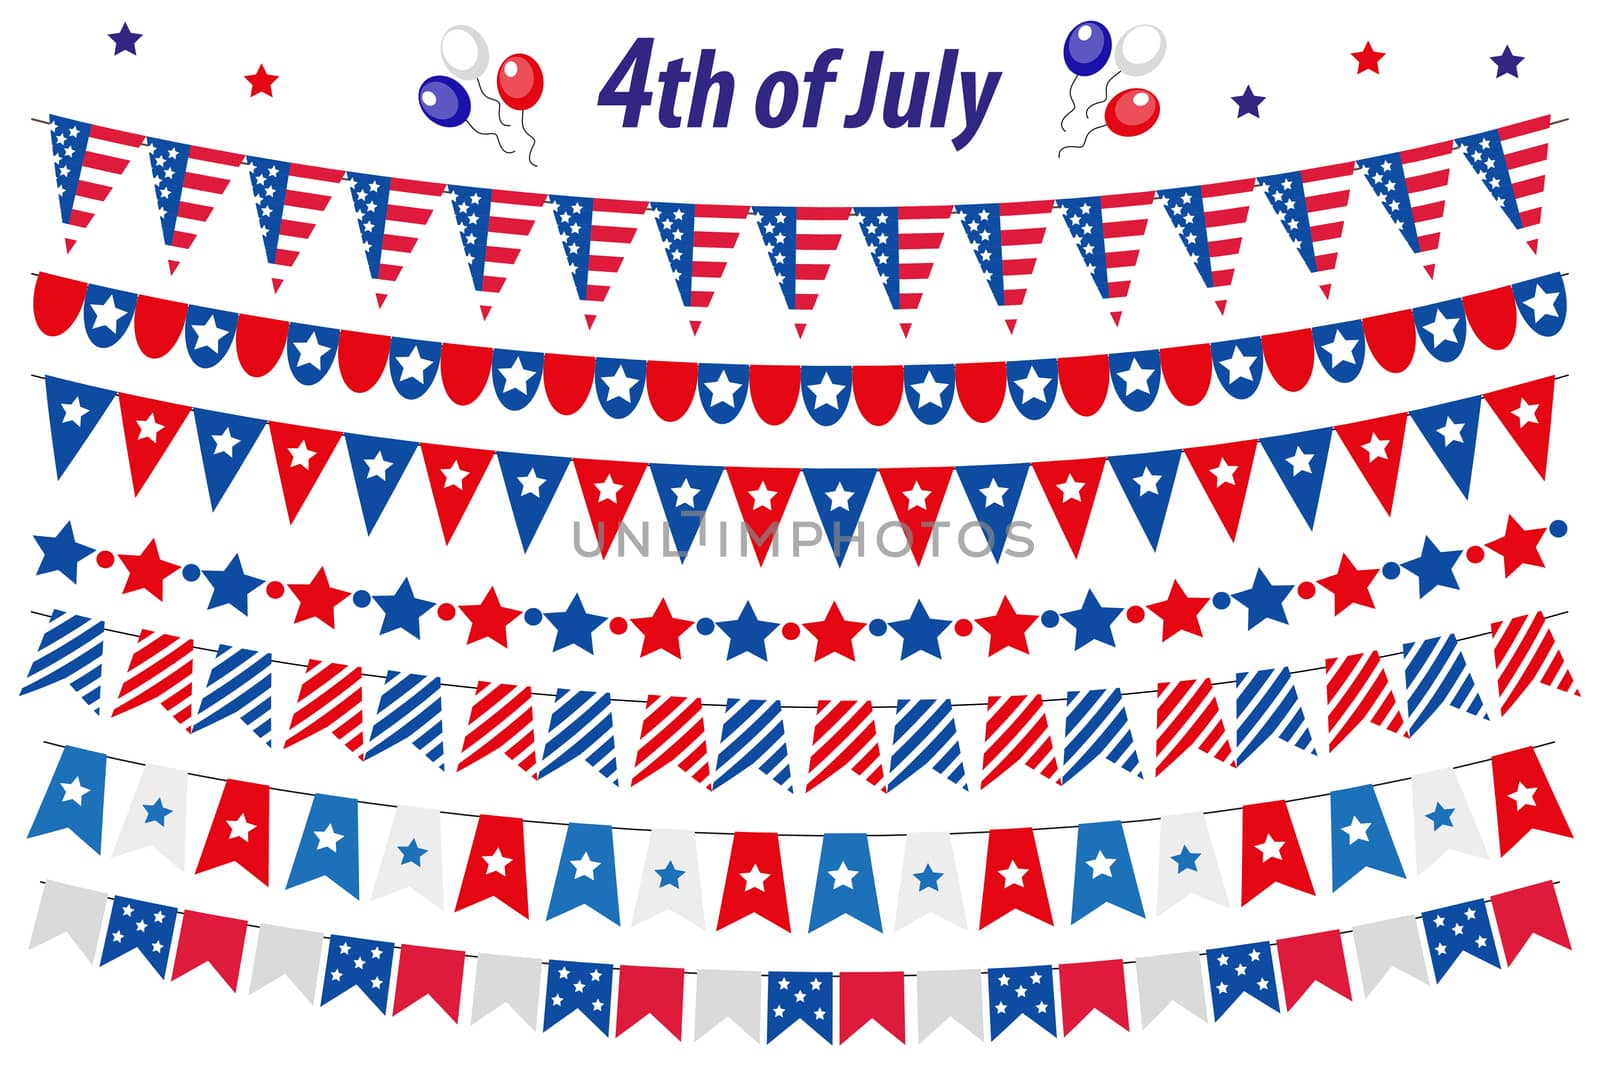 American Independence Day, celebration in USA, set bunting, flags, garland. Collection of decorative elements for July 4th national holiday. illustration, clip art. by lucia_fox